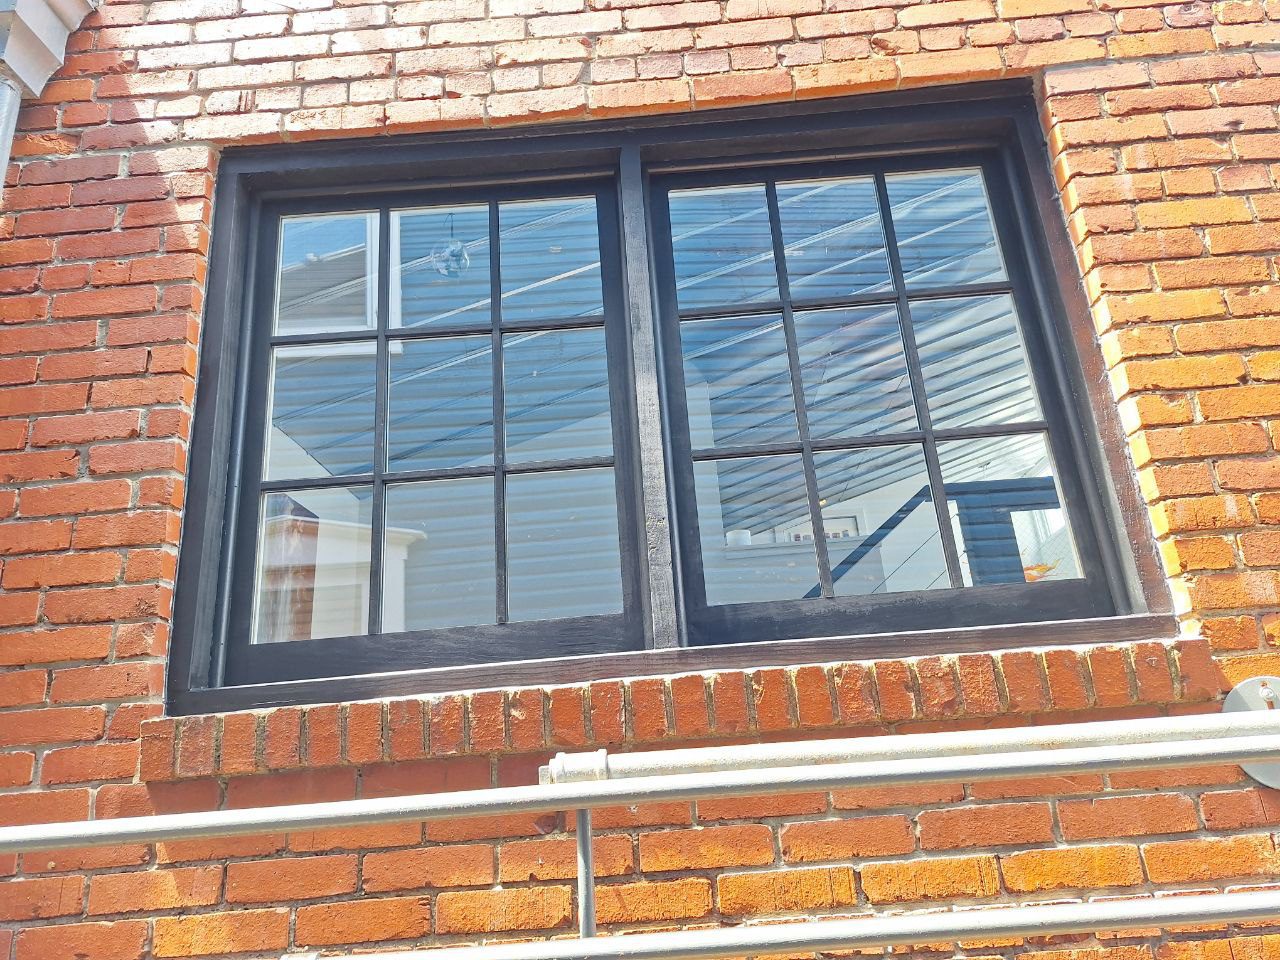 Revamping Historical Charm: The Grandview Heights Brick Building Window Project